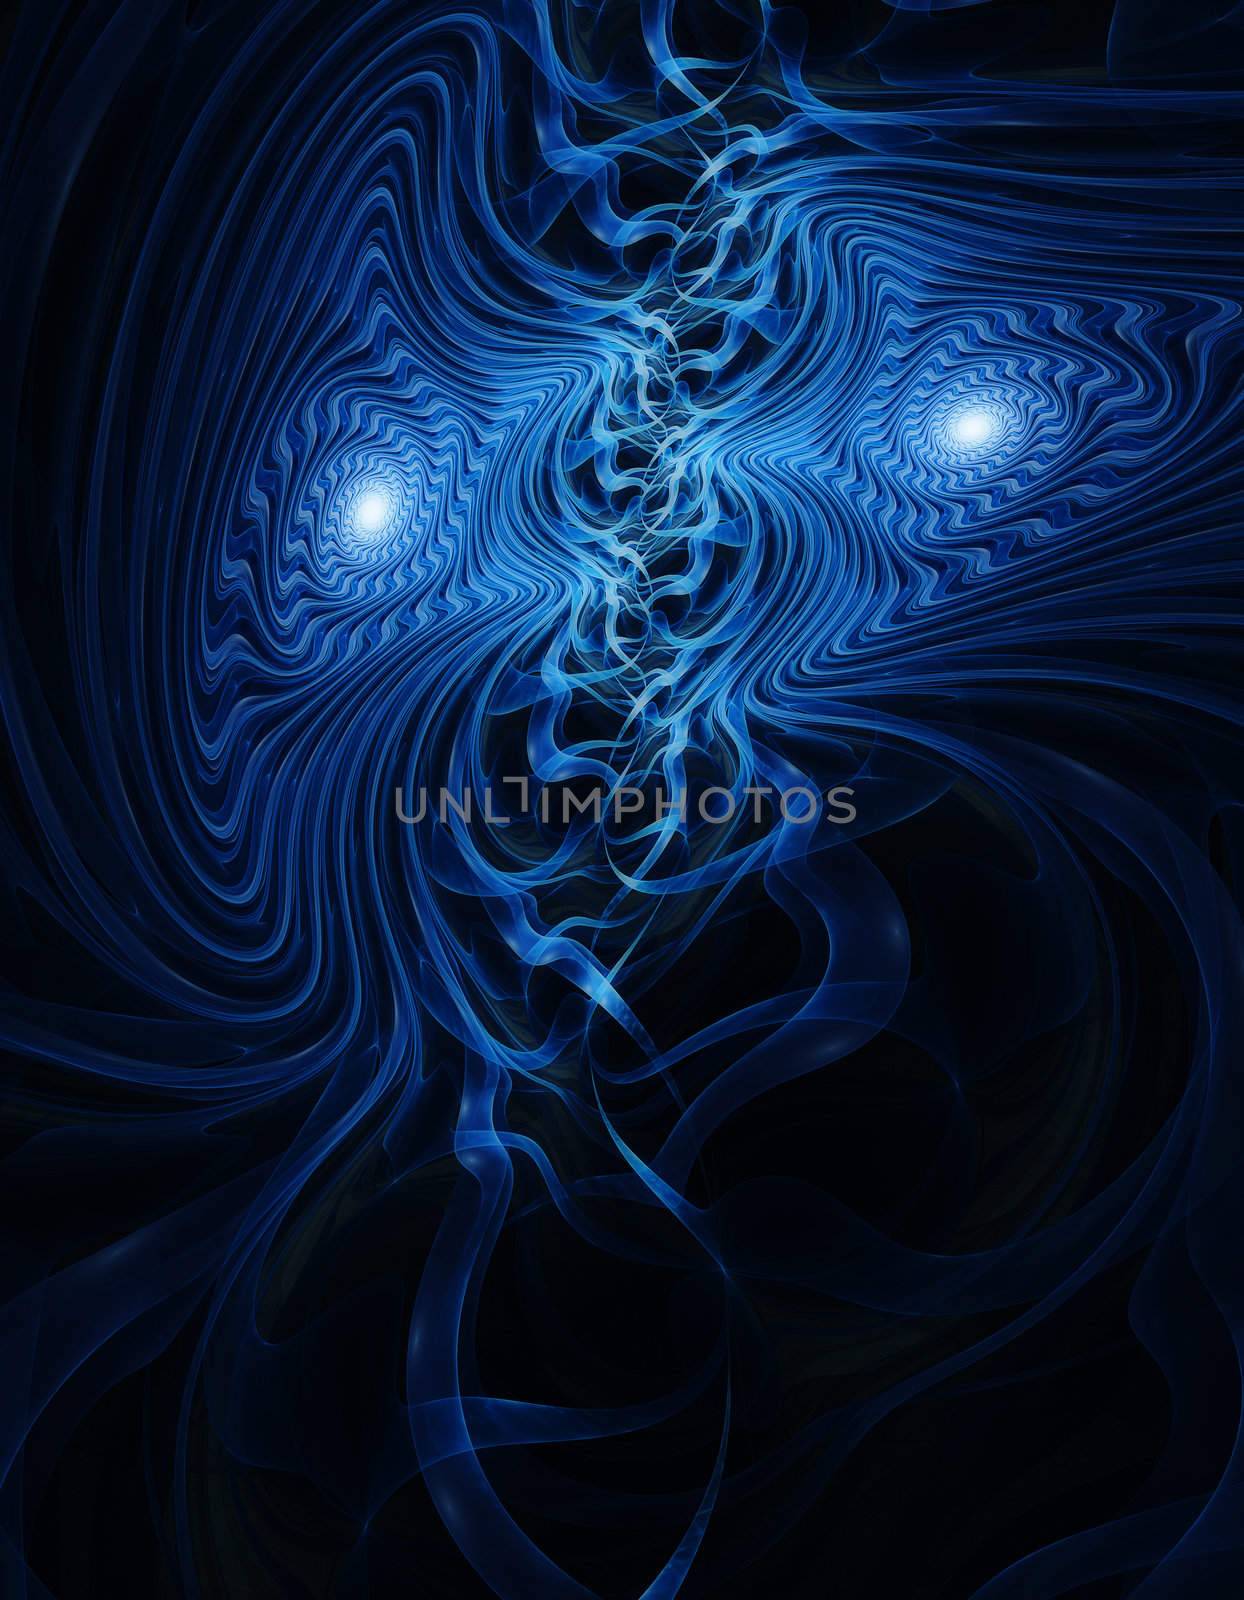 Blue Eyes and Wavy Lines Fractal by watamyr